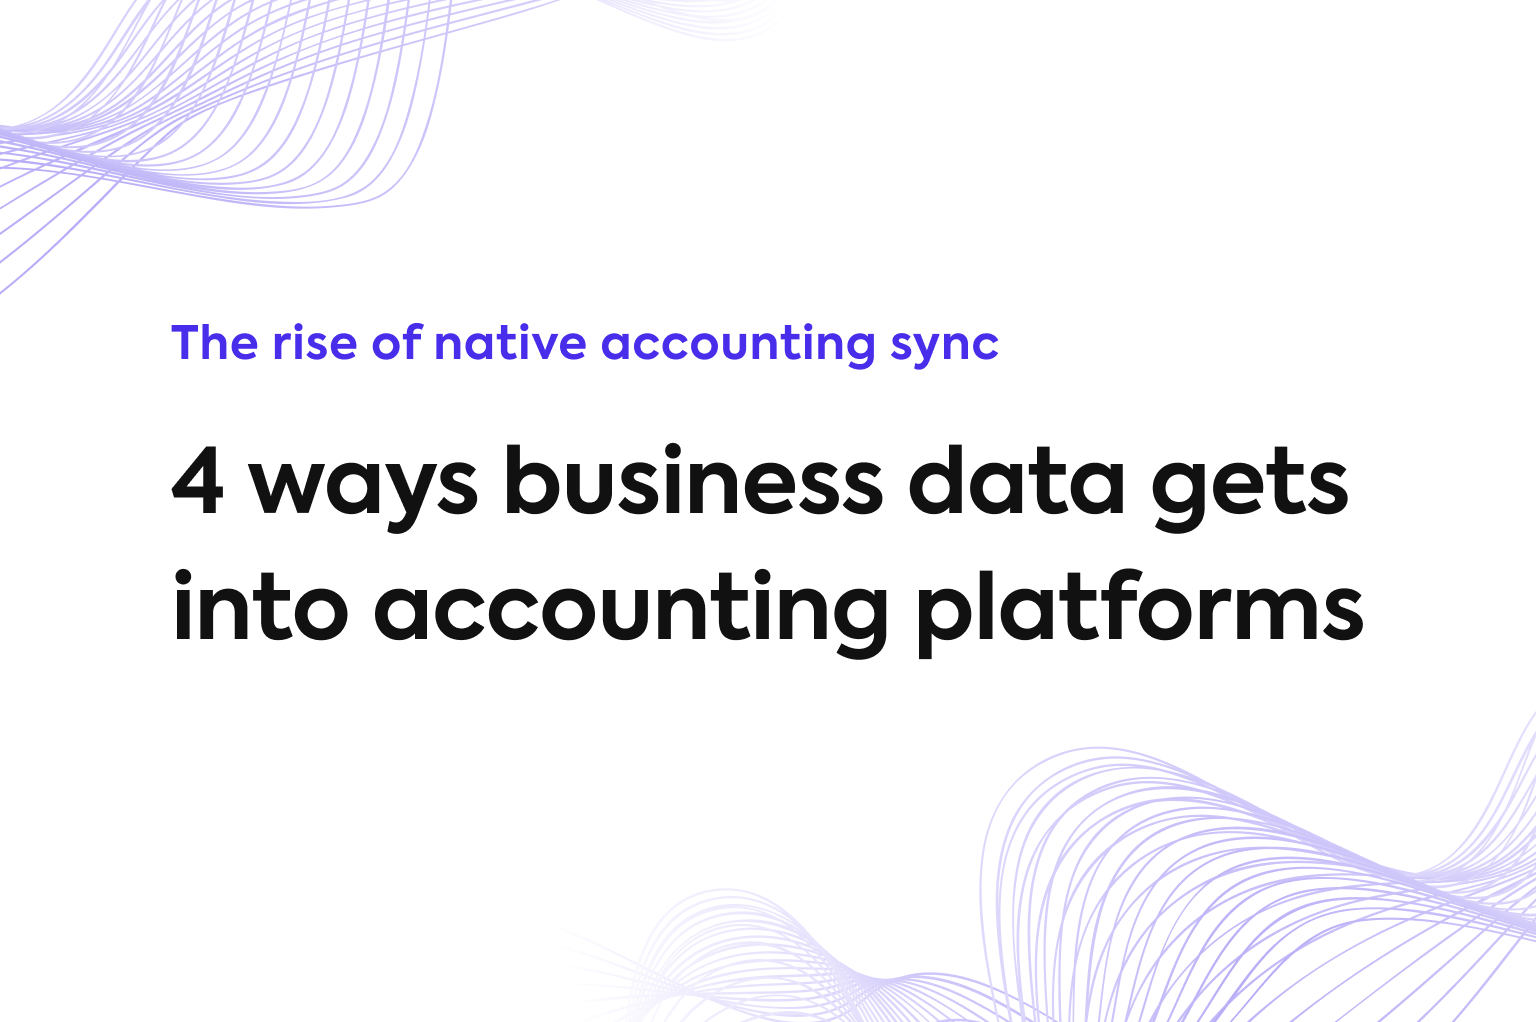 The rise of native accounting sync